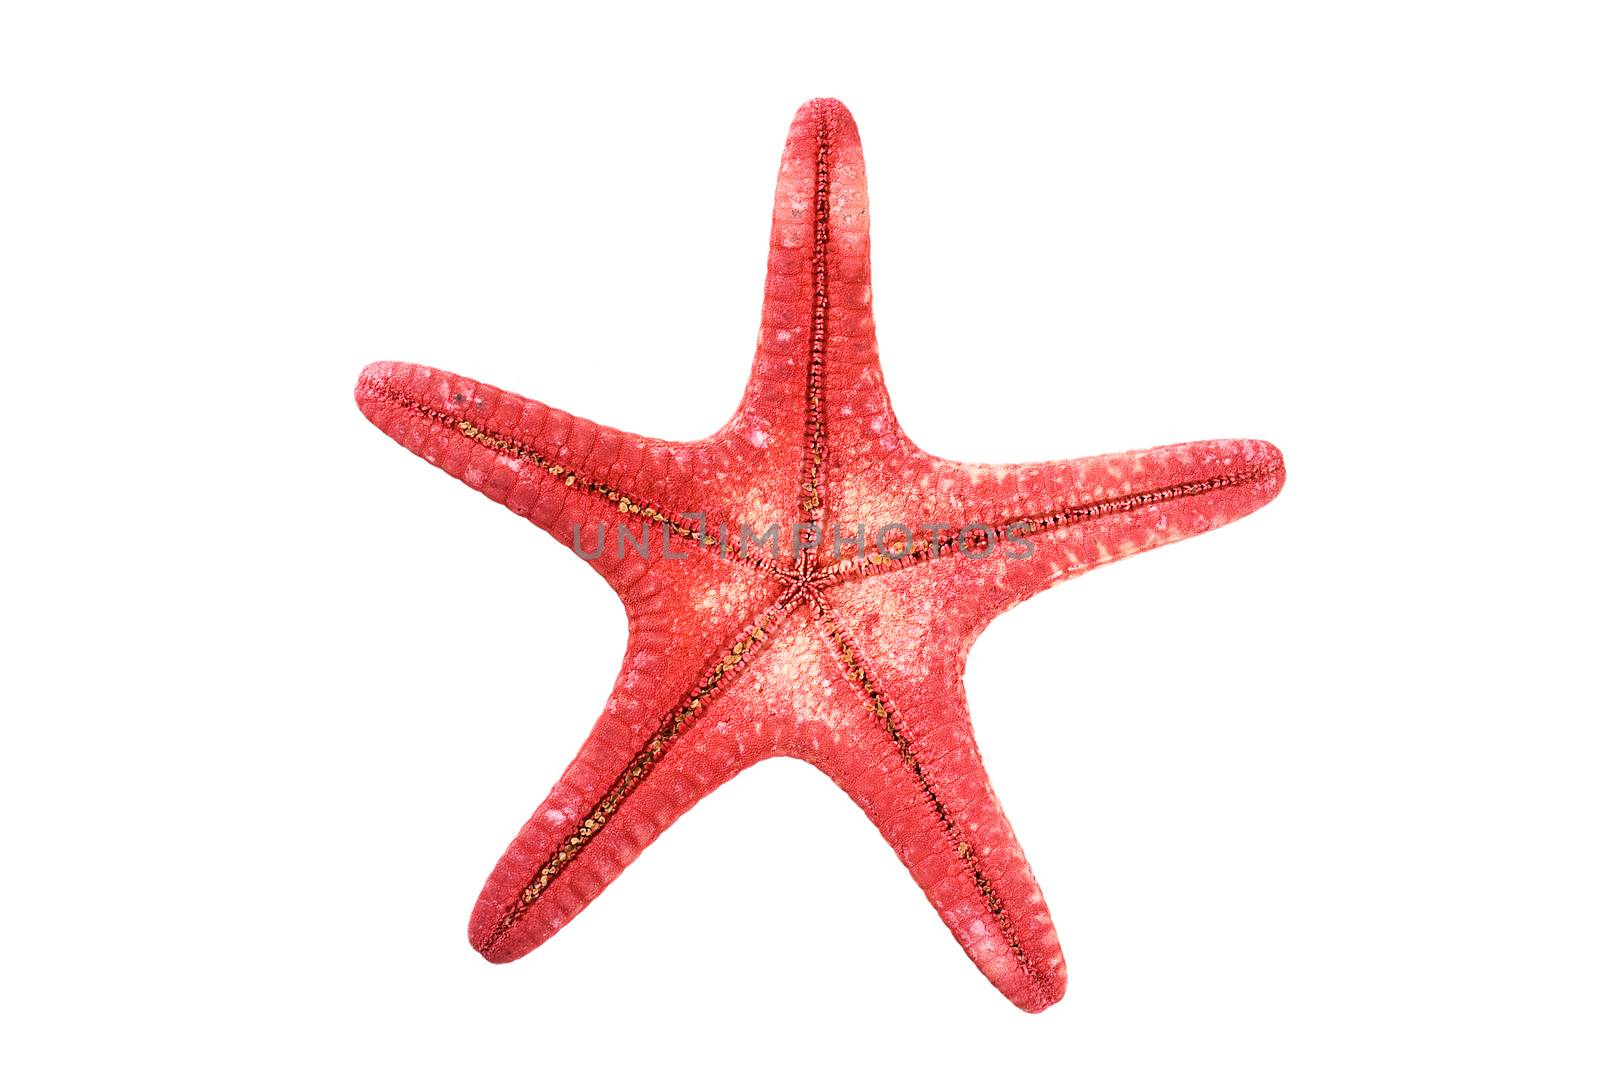 closeup view of a reddish starfish or sea star. Class: Asteroidea. Isolated